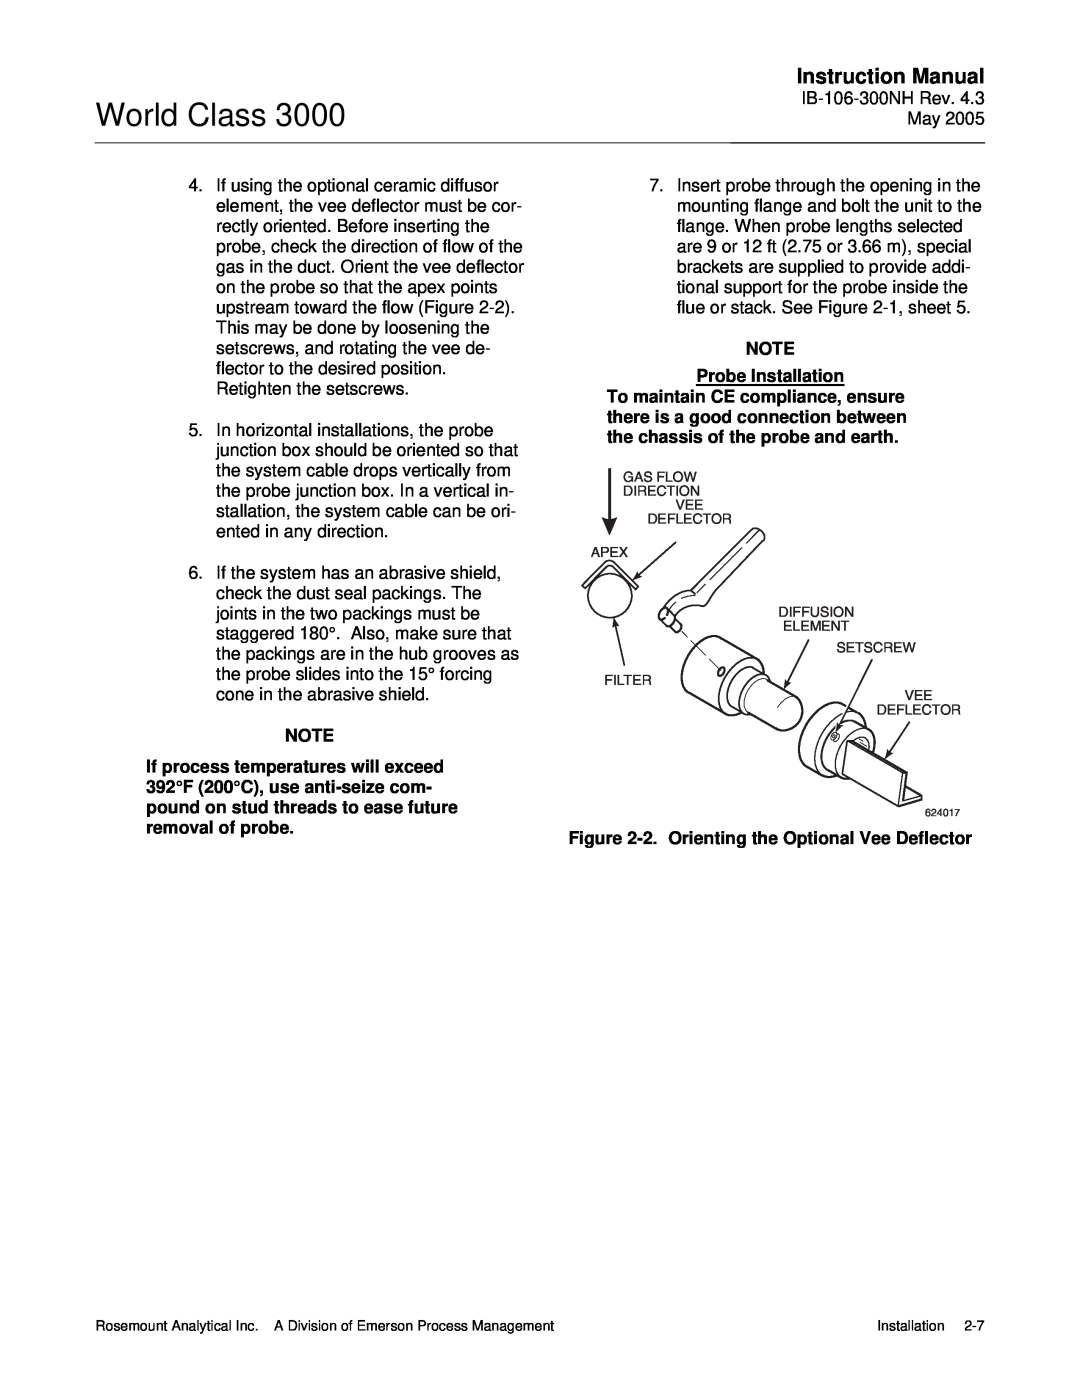 Emerson 3000 instruction manual World Class, Instruction Manual, Probe Installation, 2.Orienting the Optional Vee Deflector 